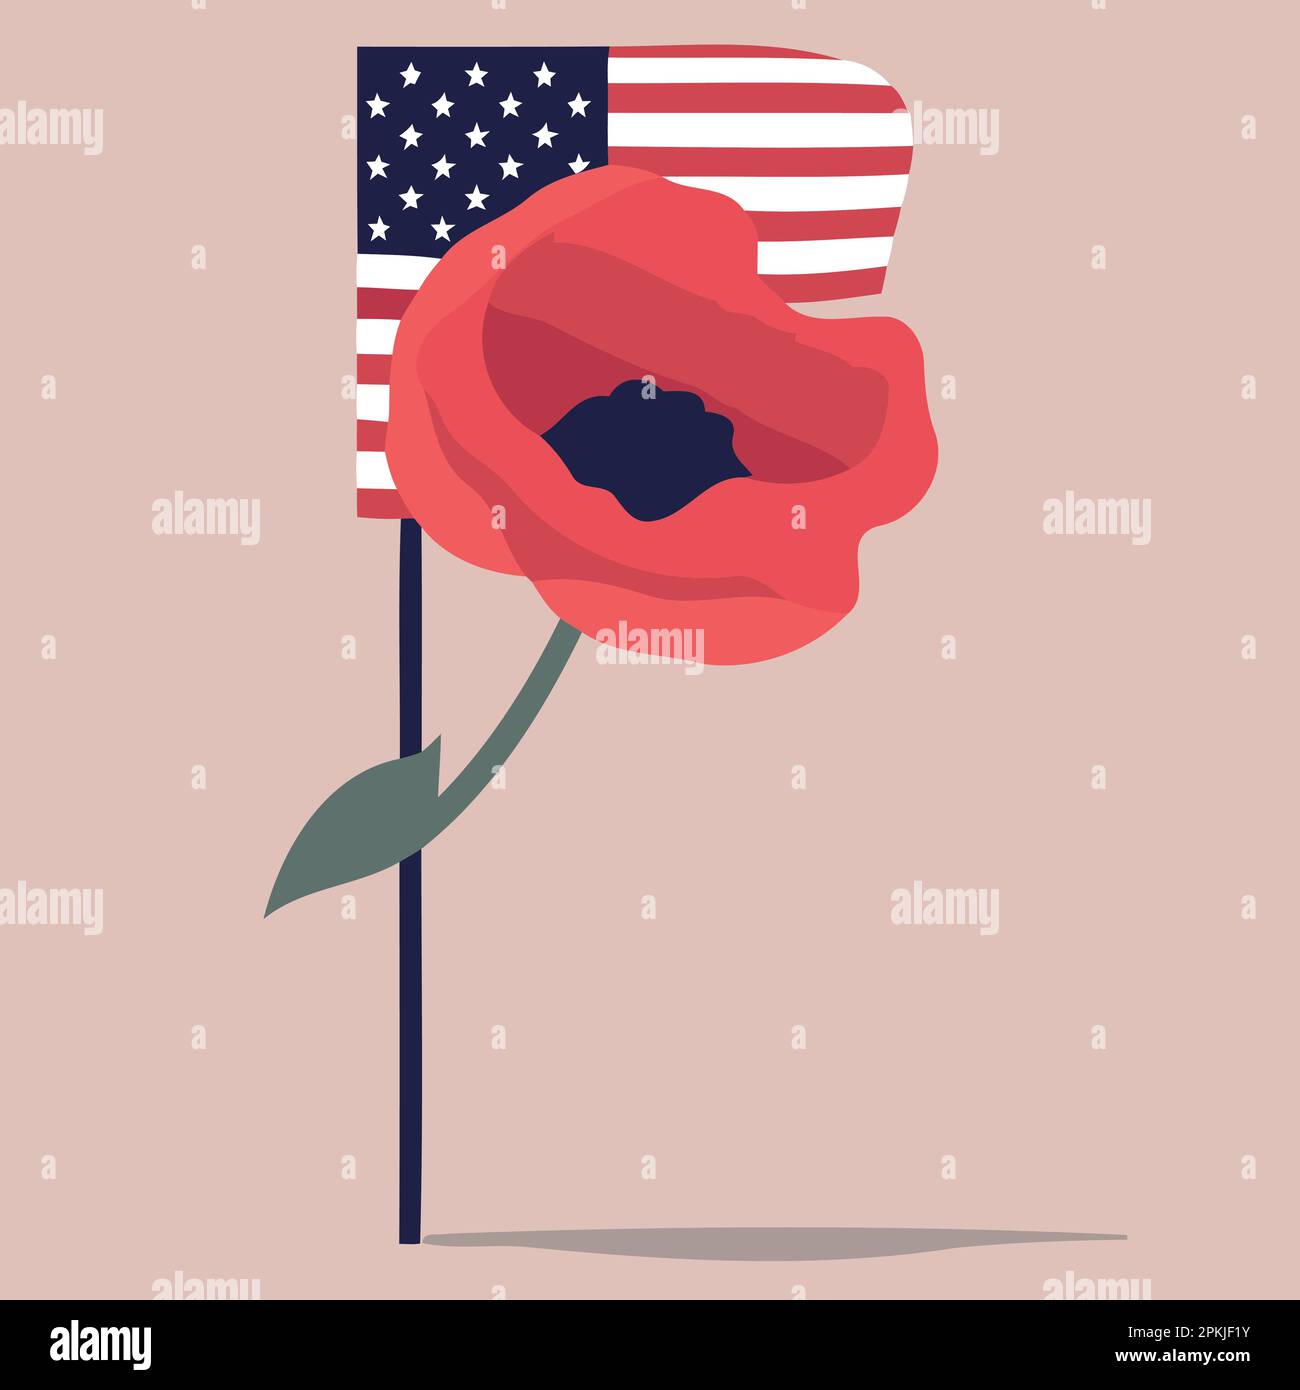 red poppy flower with the flag of the united states minimalist vector illustration Stock Vector